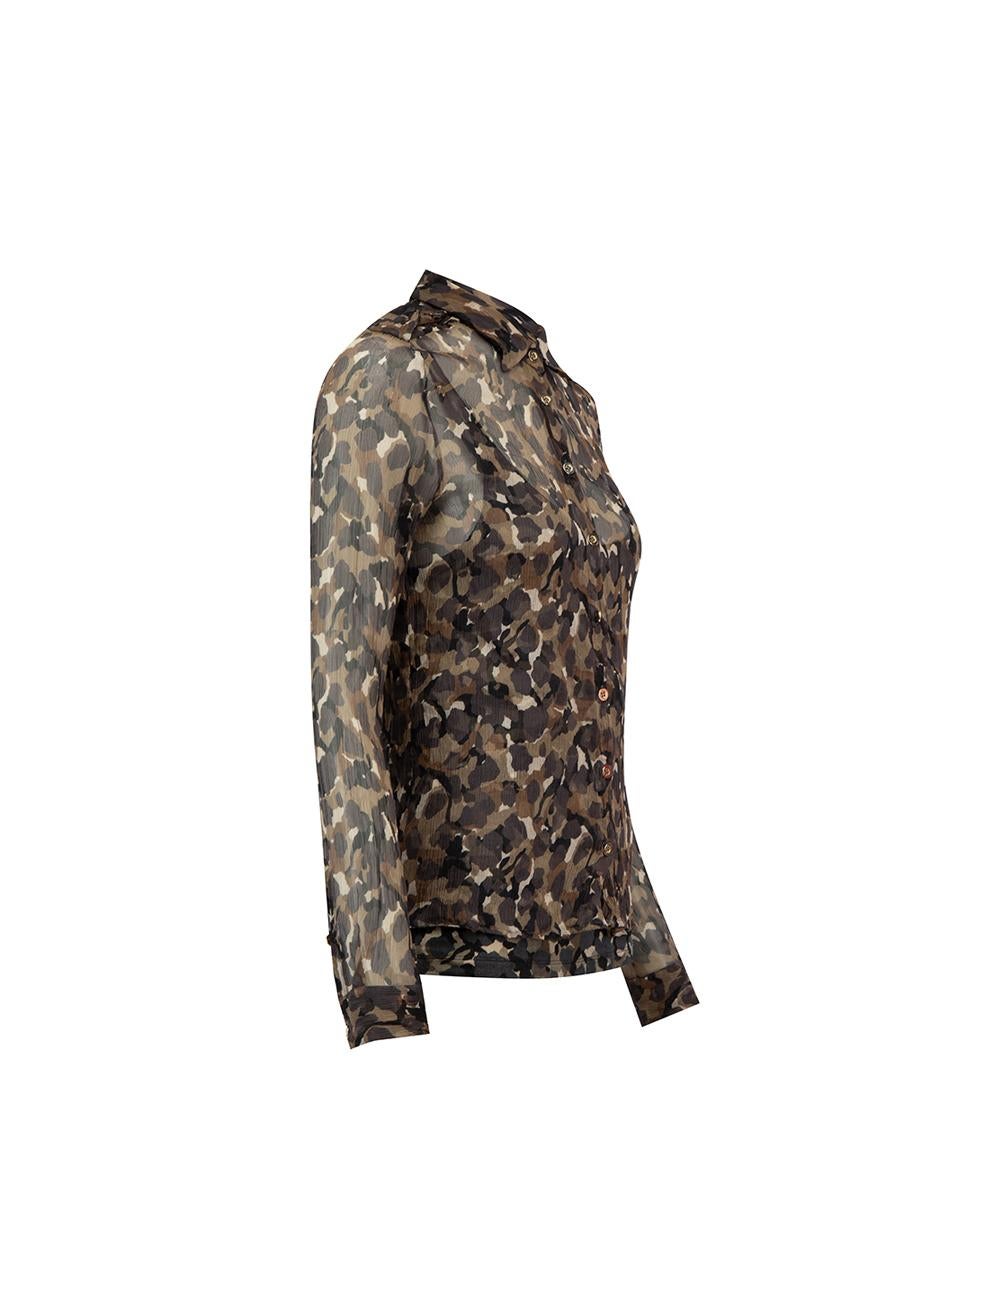 CONDITION is Good. Minor wear to set is evident. Light wear to fabric print where dye has run on the under-layer of this used Max Mara designer resale item.



Details


Multicolour

Synthetics and jersey

Camo pattern shirt and tank top set

Sheer